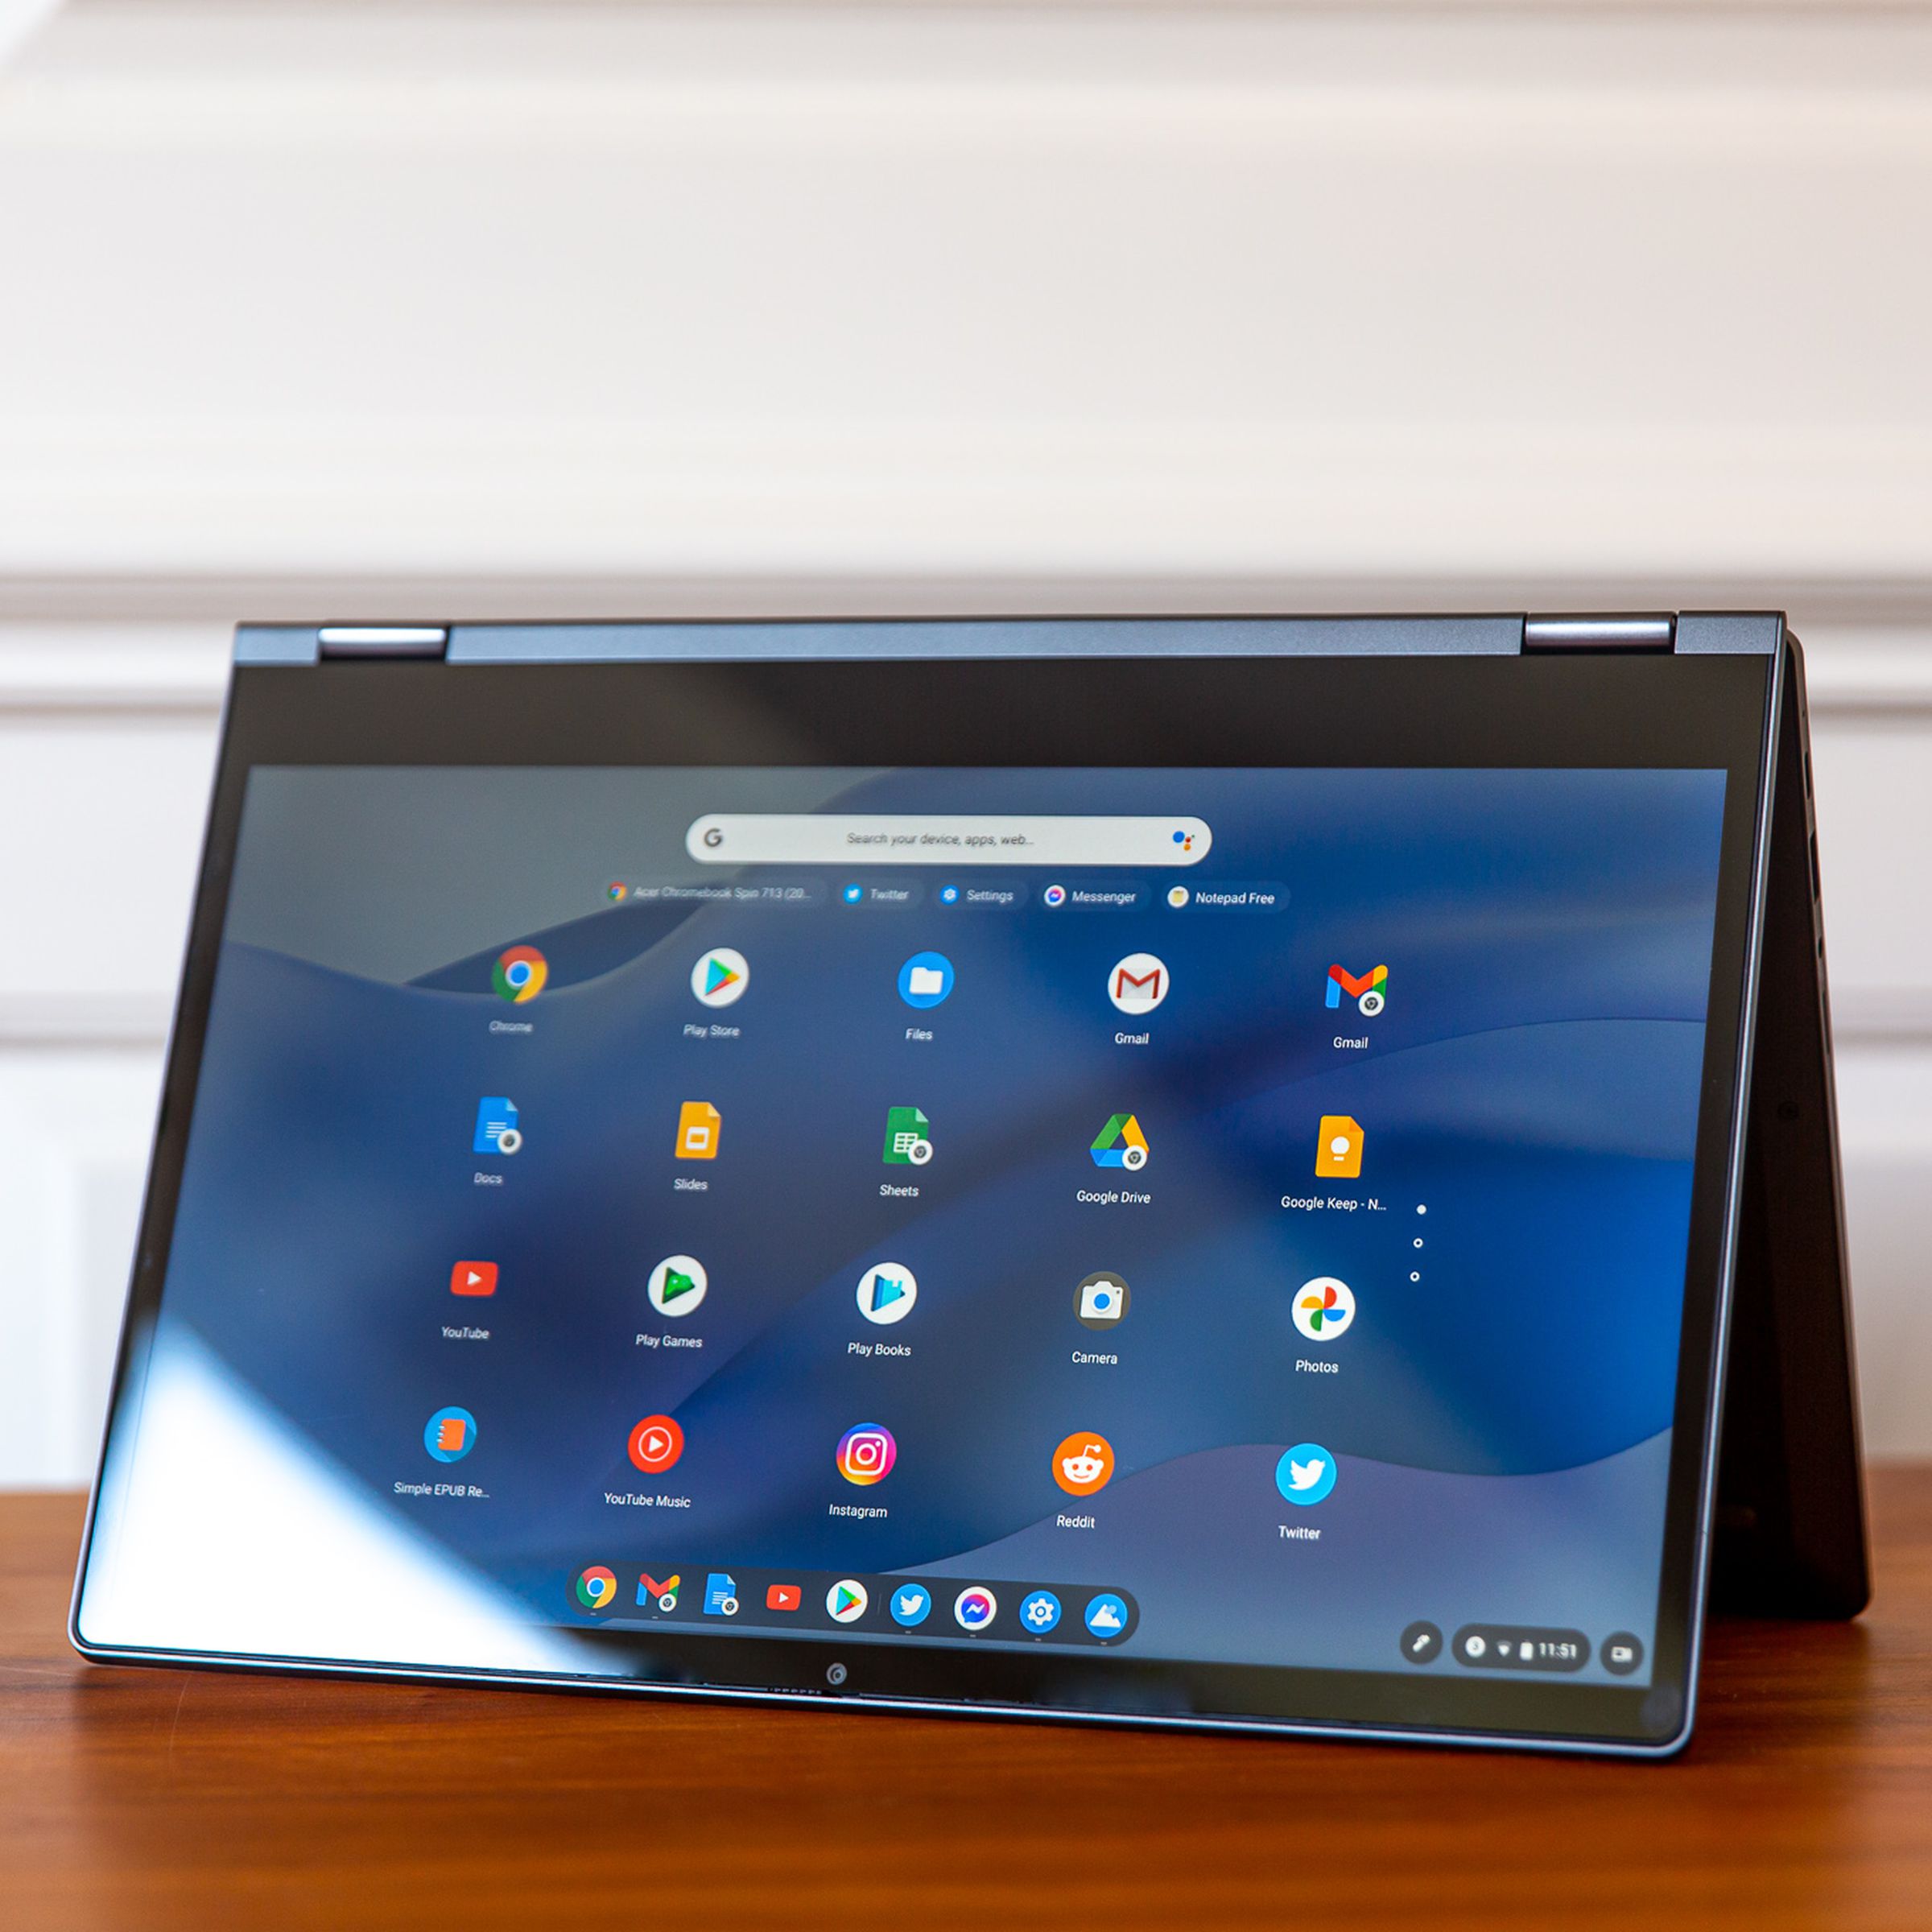 The Lenovo Flex 5 Chromebook in tent mode, angled to the left. The screen displays a grid of Chrome OS icons on a blue wavy background.